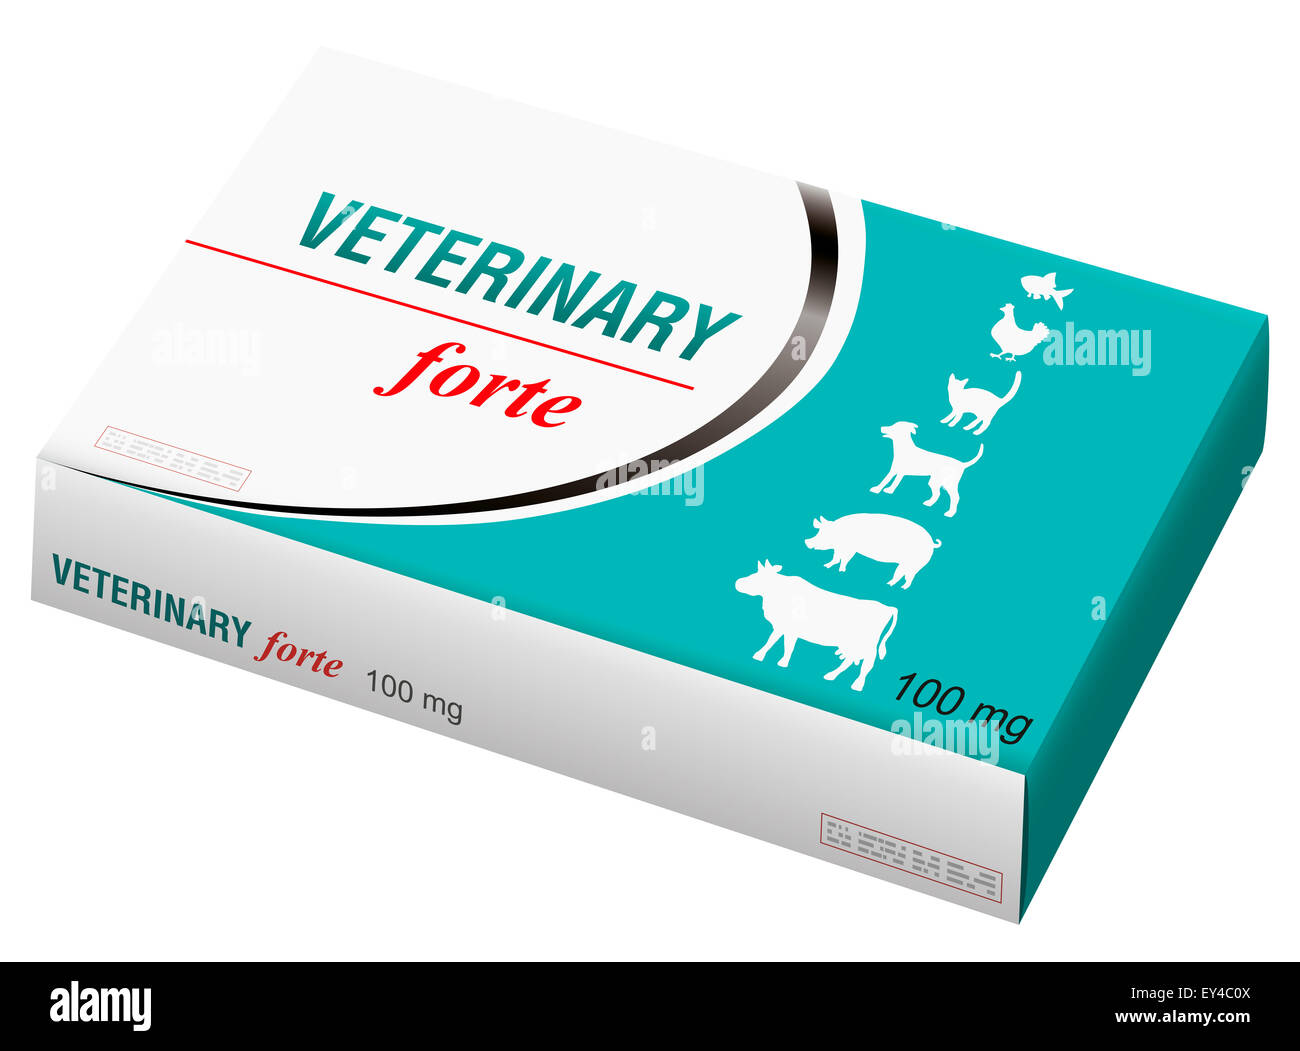 Veterinary medicine named VETERINARY FORTE with silhouettes of pets as brand logo on the box. Stock Photo